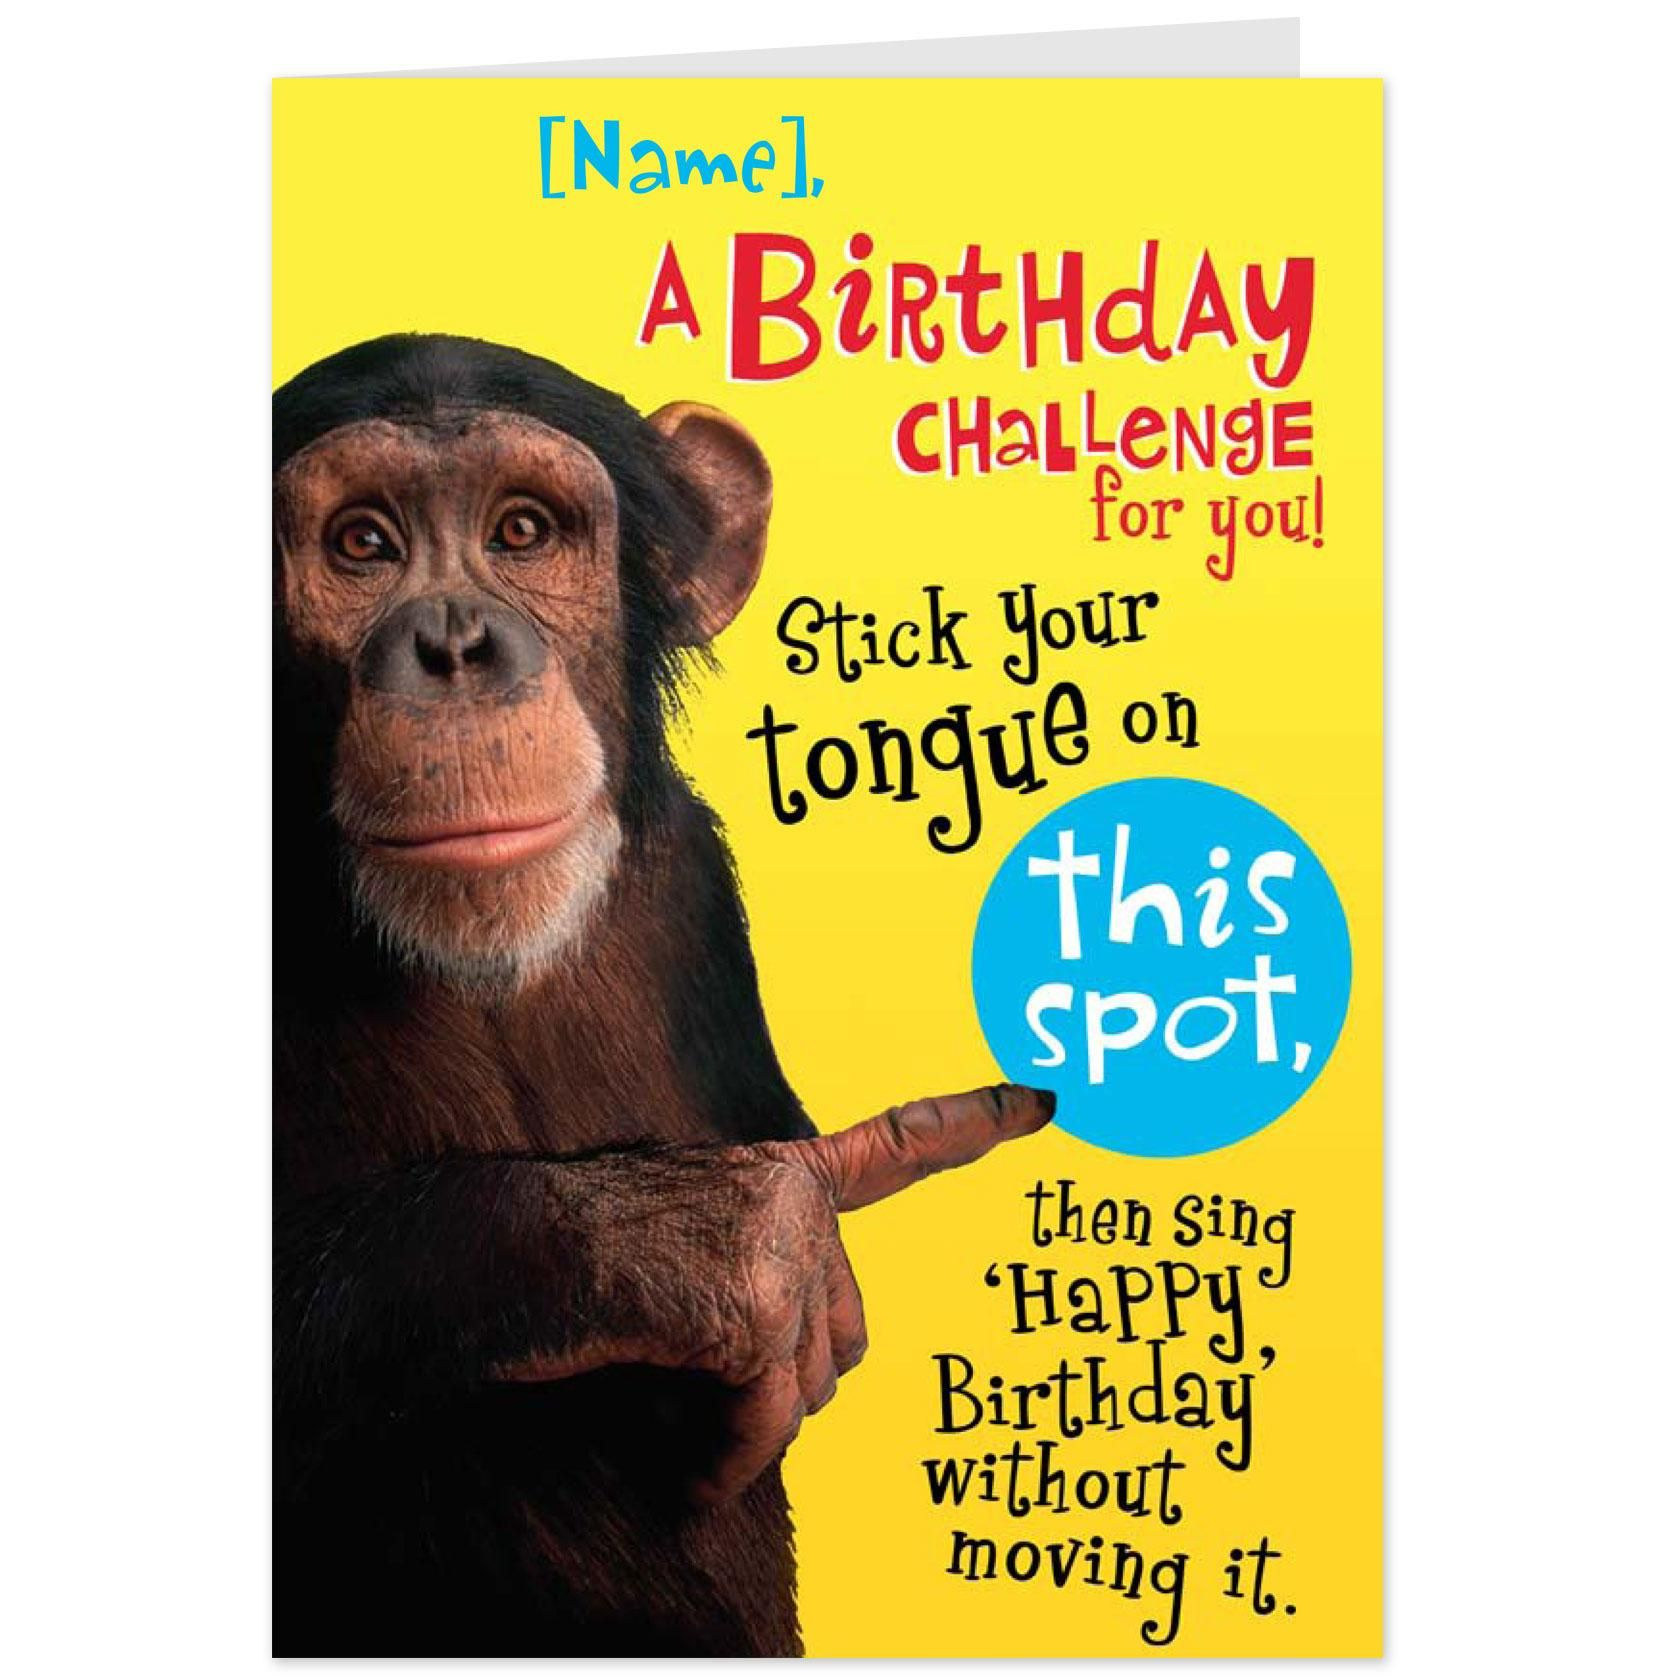 Funny Birthday Cards | Free Printable Cards | Send To Friends &amp;amp; Family inside Free Printable Funny Birthday Cards